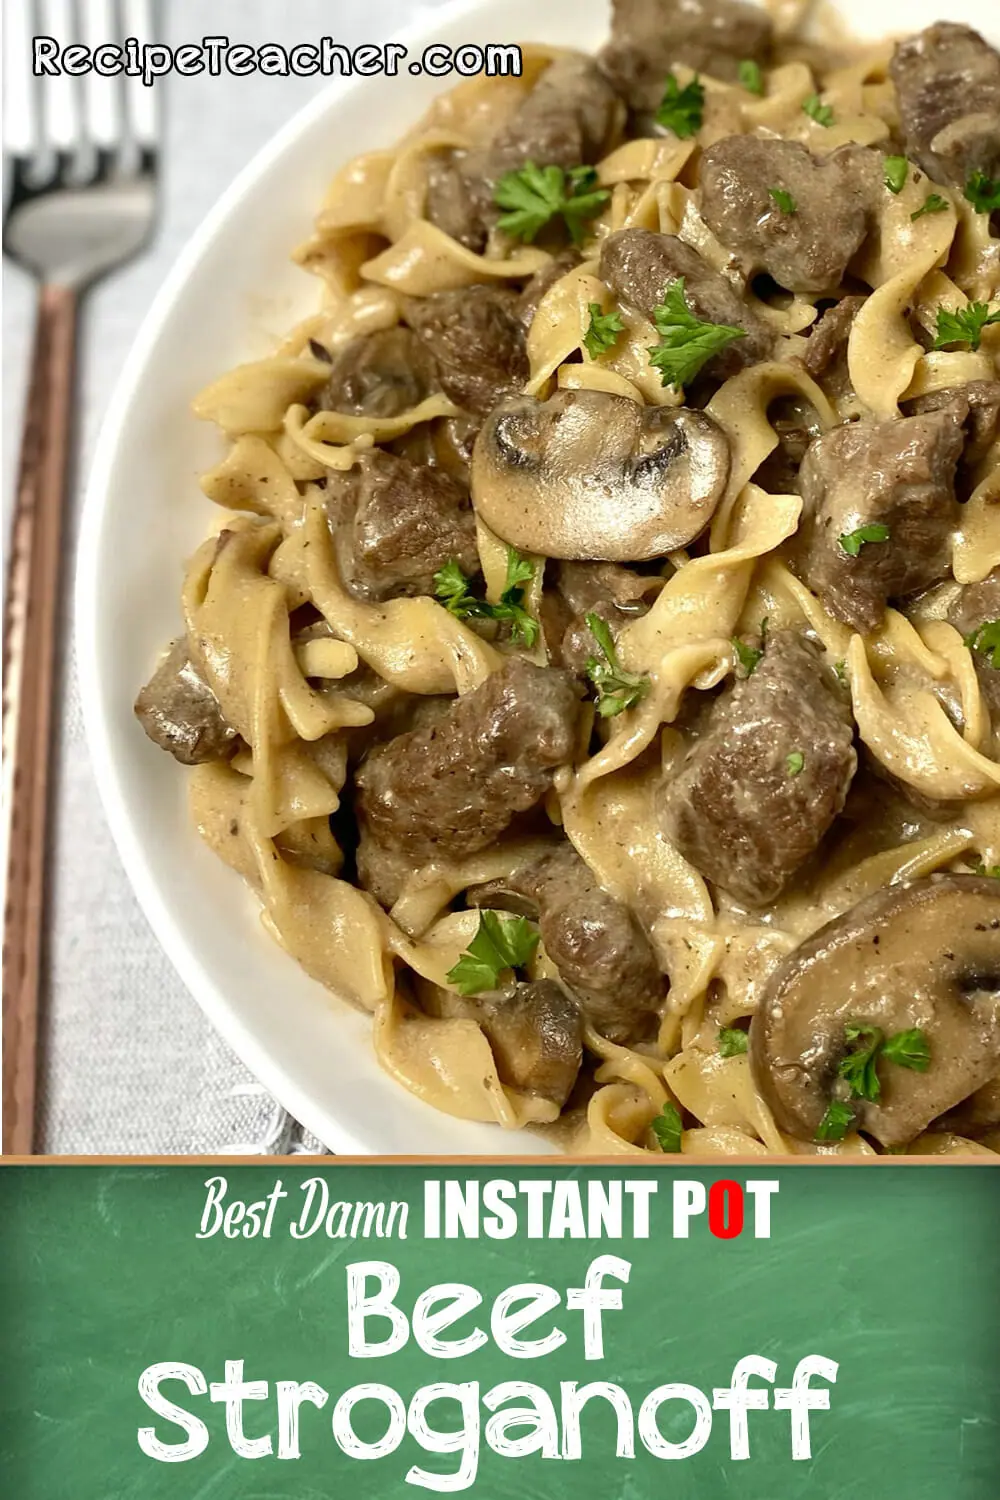 Beef stroganoff cooked to perfection in an Instant Pot